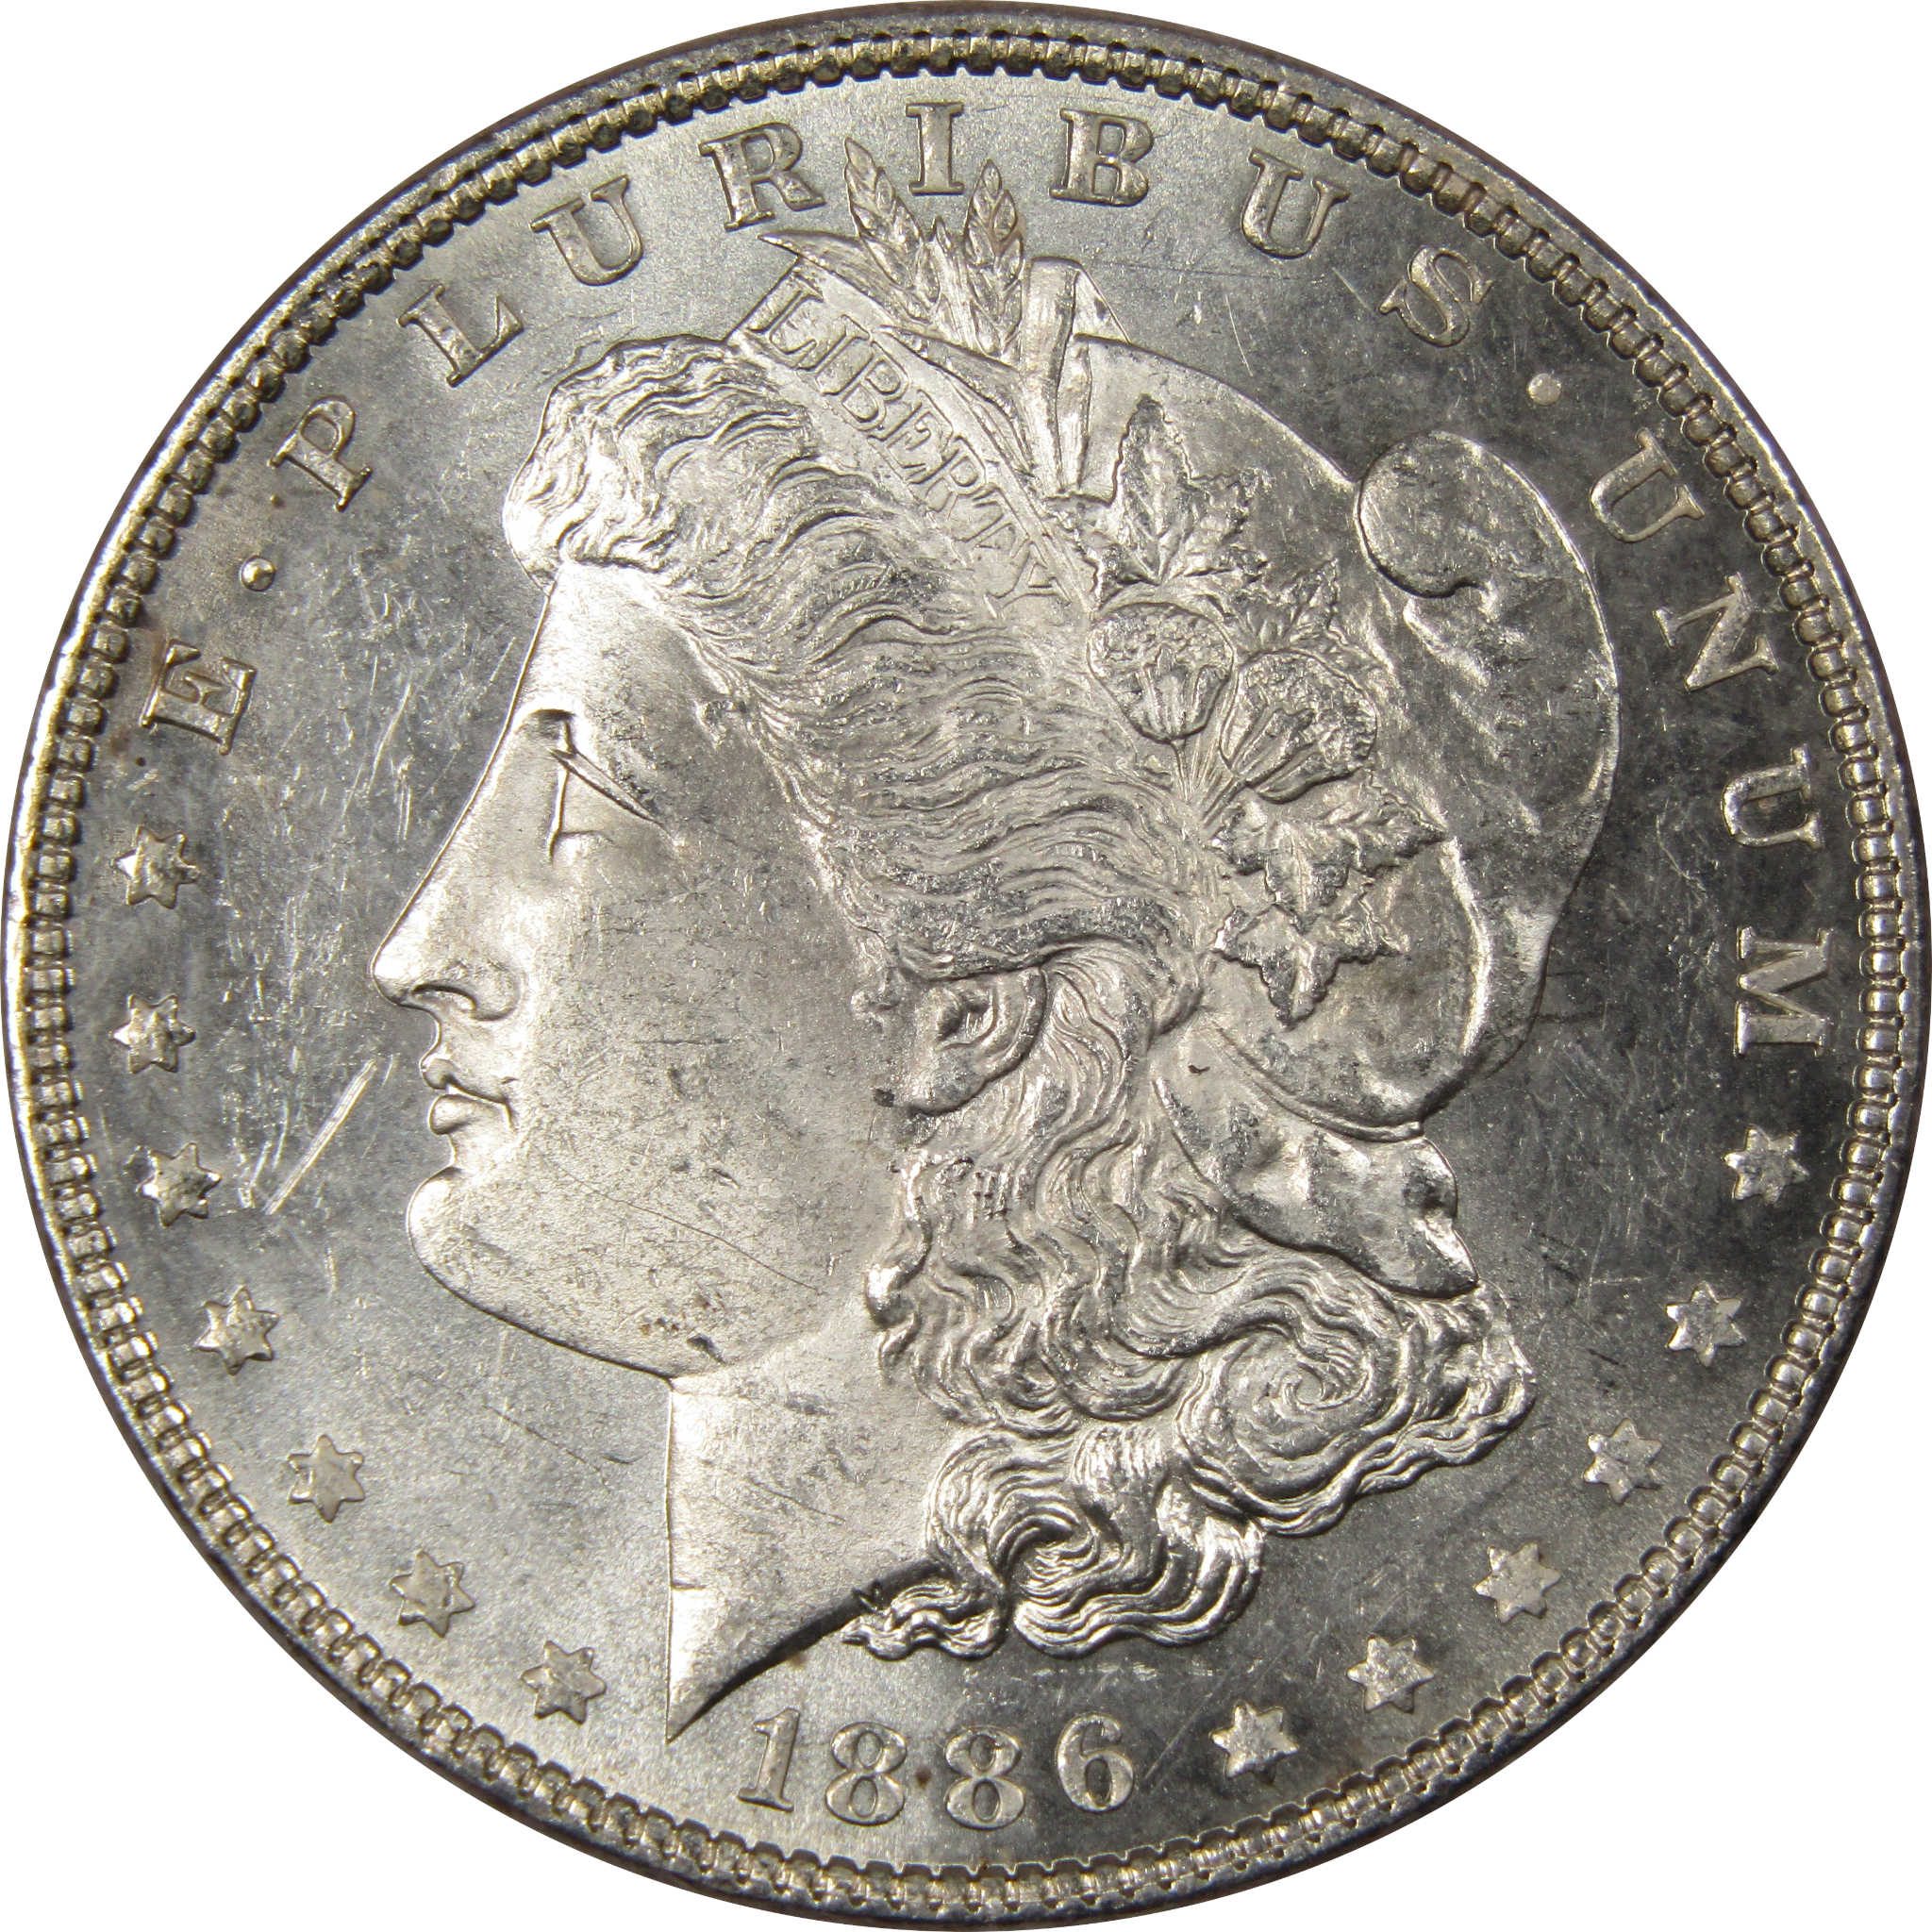 1886 Morgan Dollar Uncirculated Details 90% Silver Coin SKU:IPC7093 - Morgan coin - Morgan silver dollar - Morgan silver dollar for sale - Profile Coins &amp; Collectibles